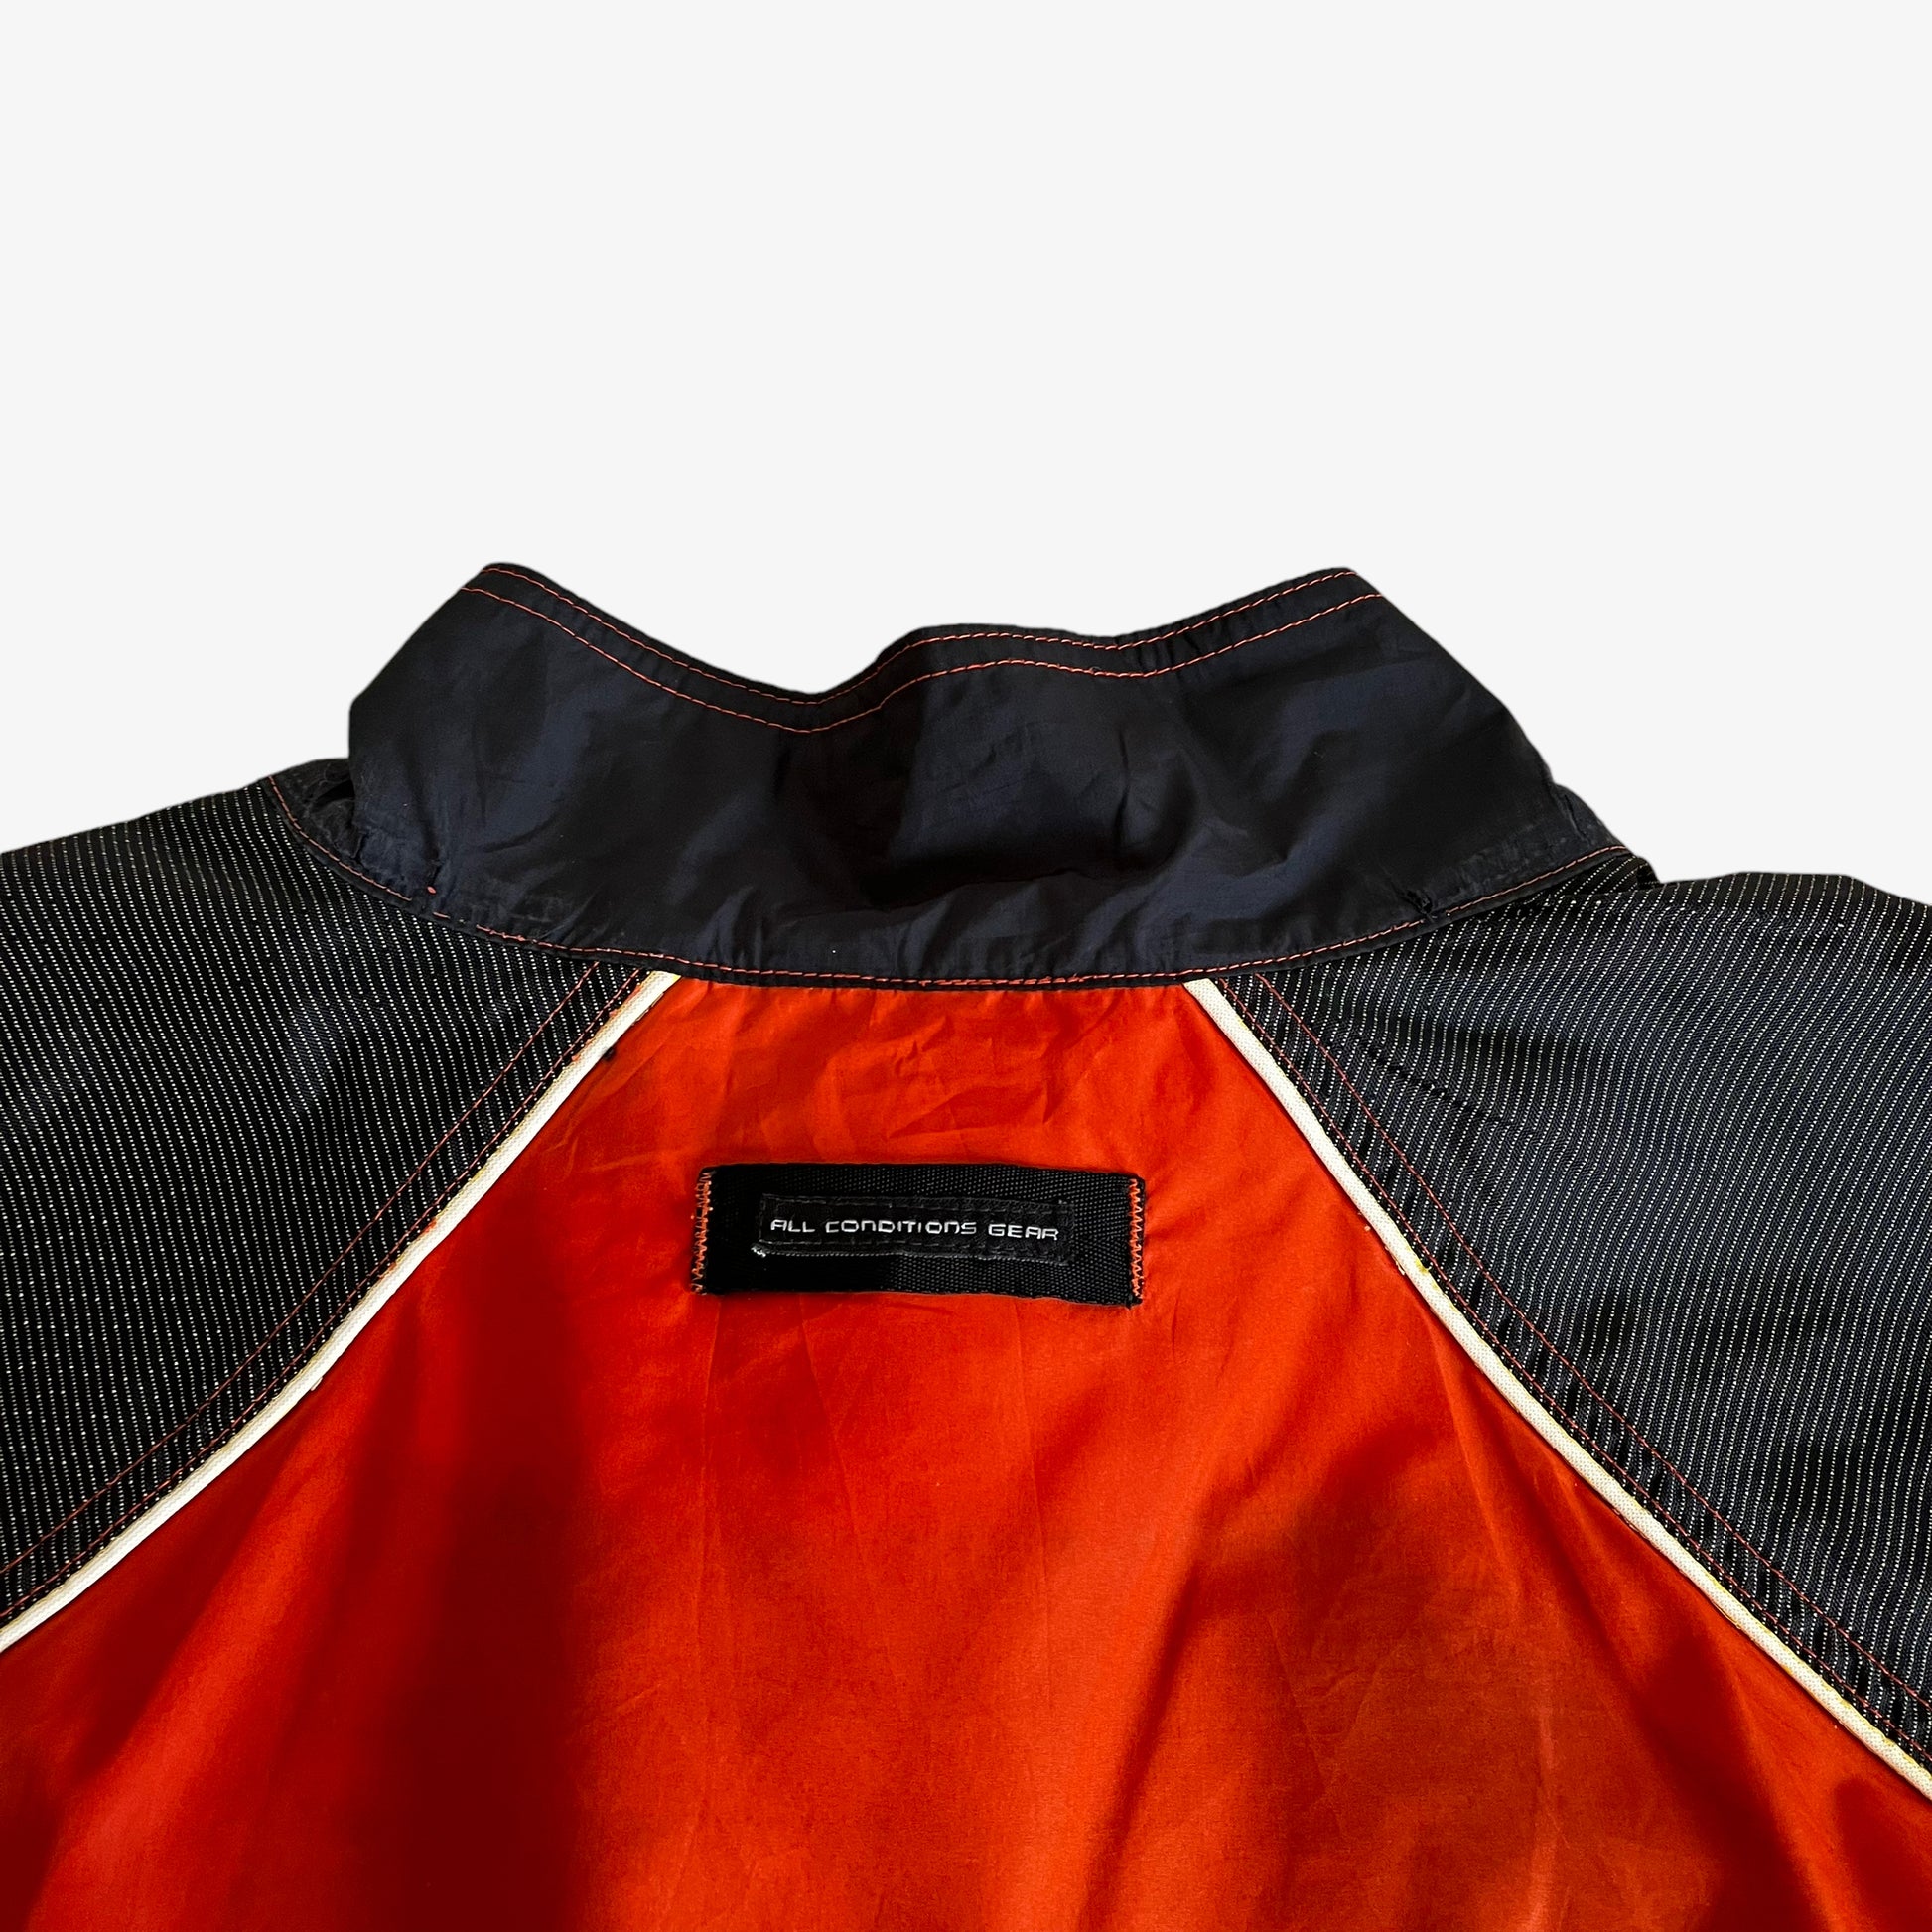 Vintage 90s Nike ACG Orange Utility Jacket With Back Foldable Pouch Collar - Casspios Dream